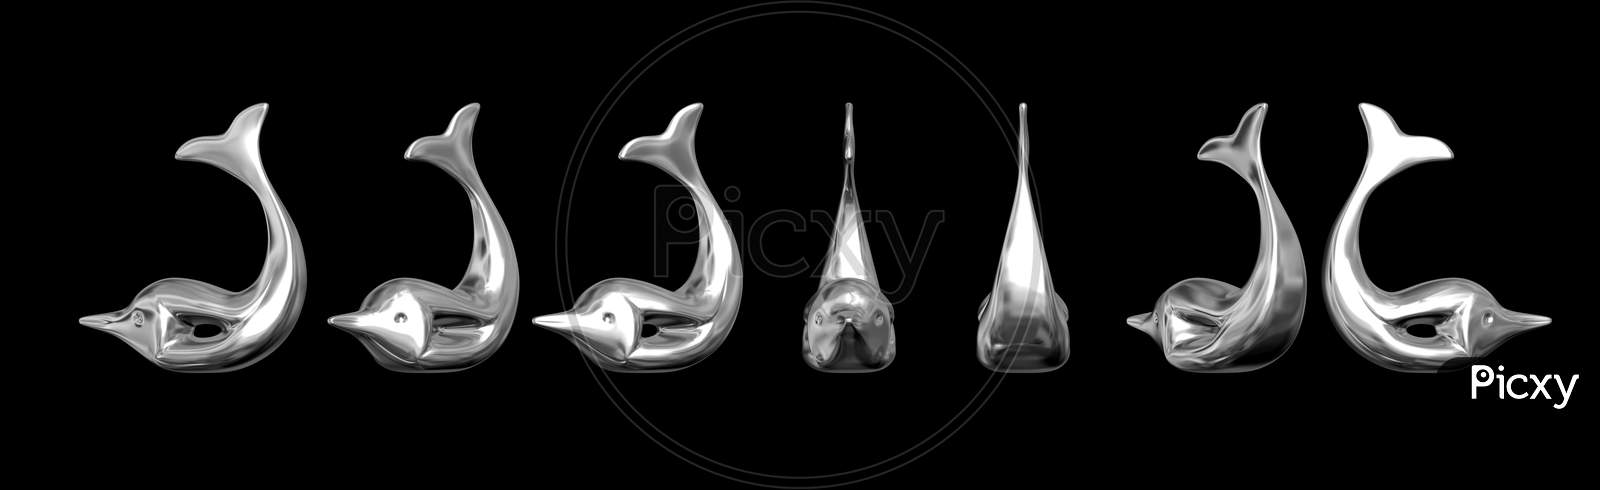 3D Render Of Statue Of Fish From Different Angles, Fish Illustration, Fish Emblem